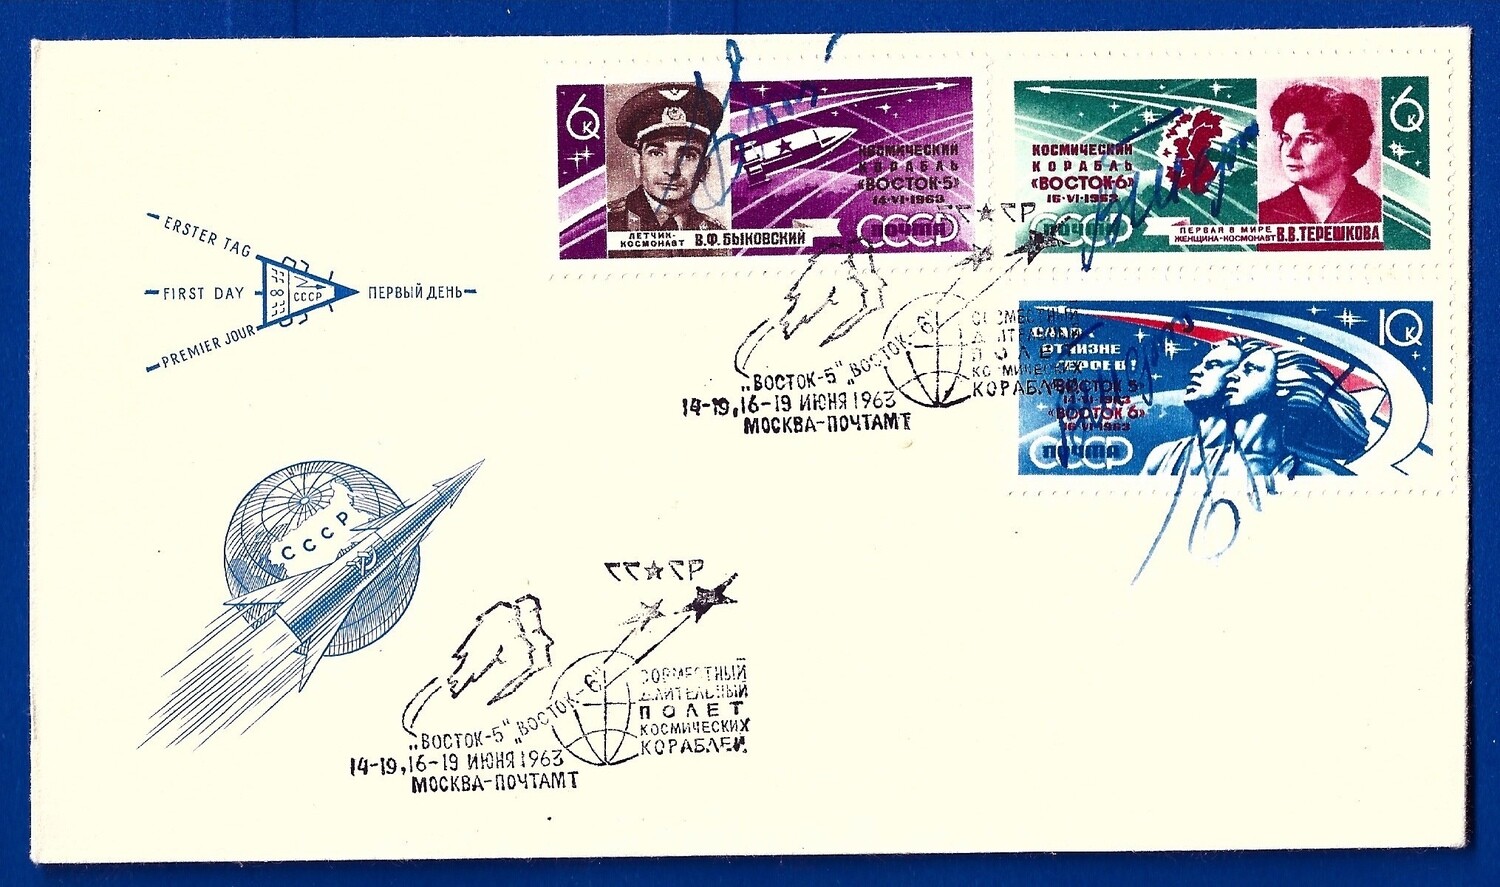 1963 Vostok-5 Vostok-6 Signed First Day Cover